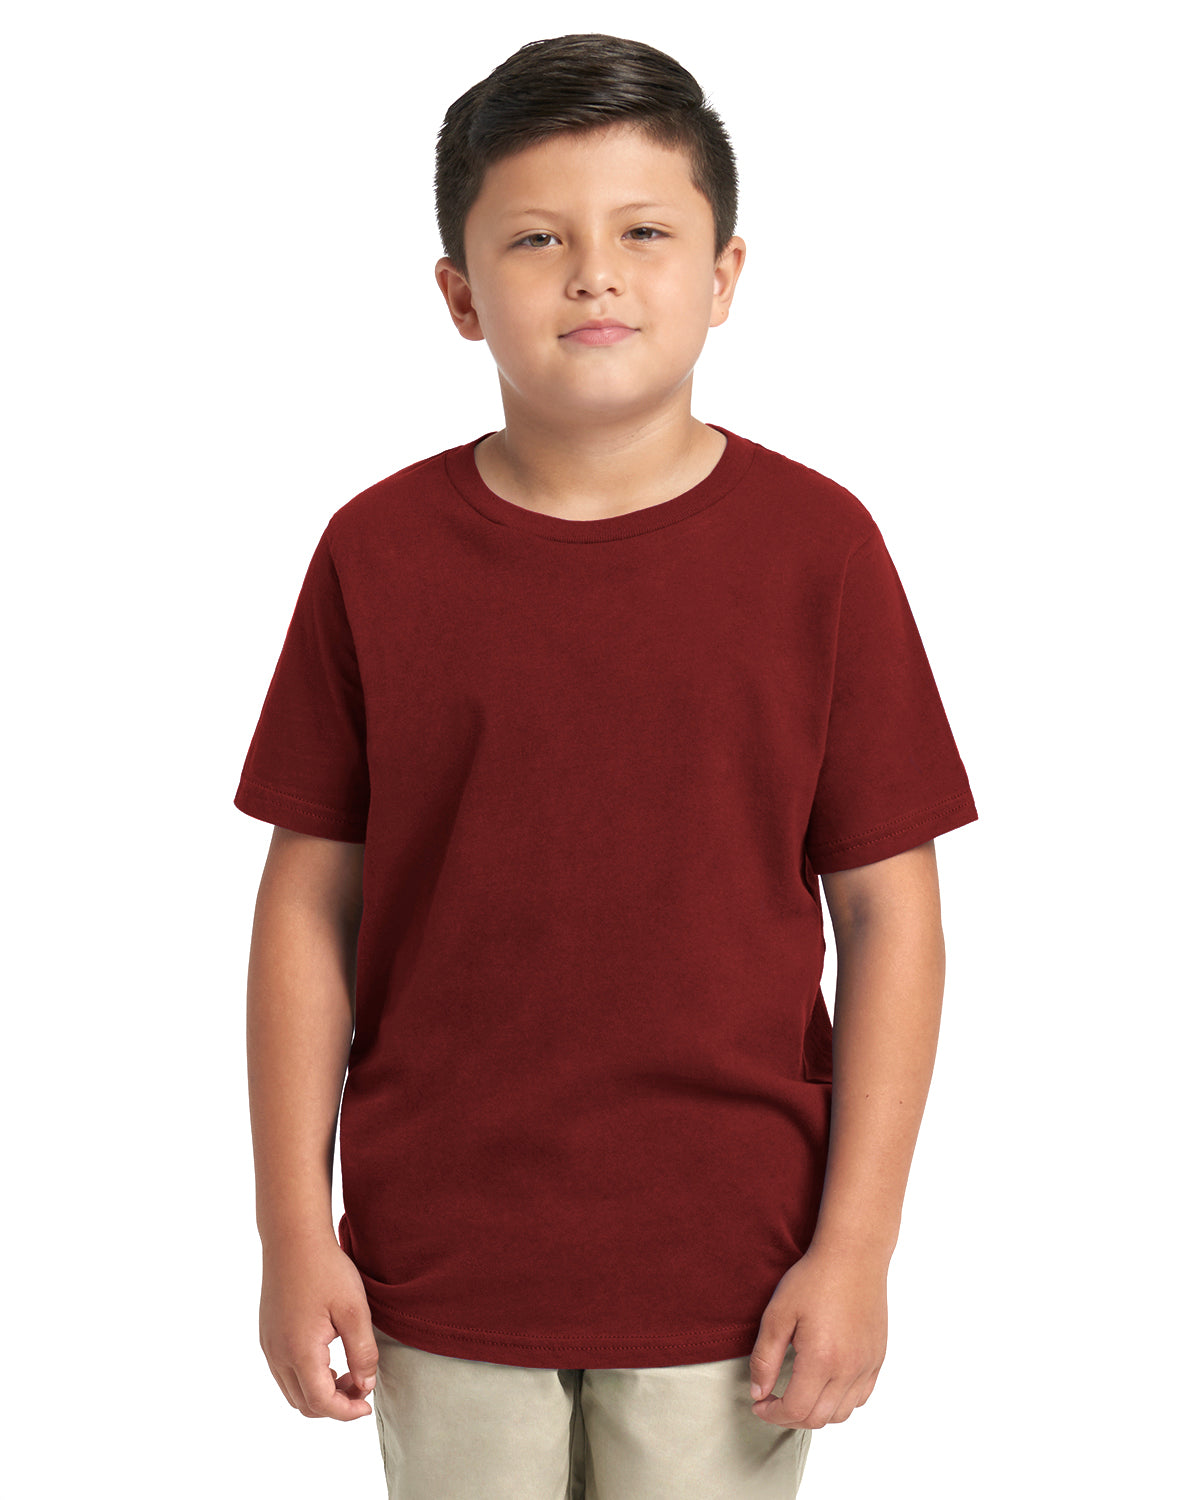 child model wearing next level youth tee in cardinal red